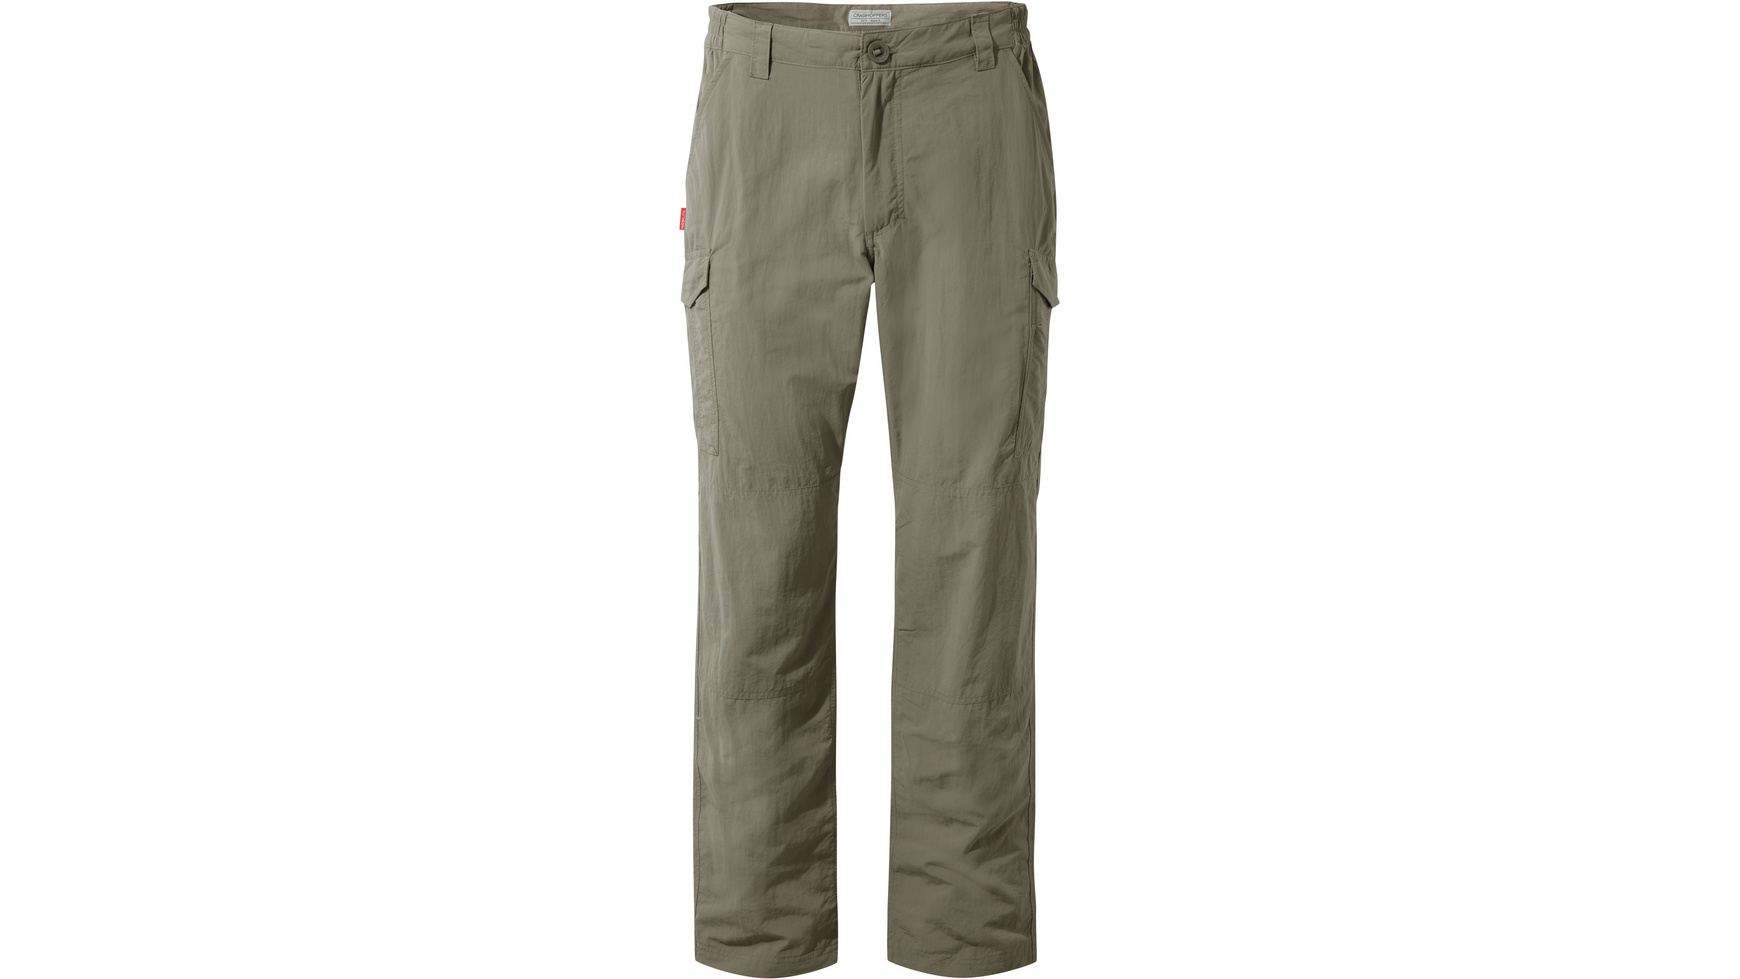 Craghoppers Nosilife Pro Convertible II Trousers Men